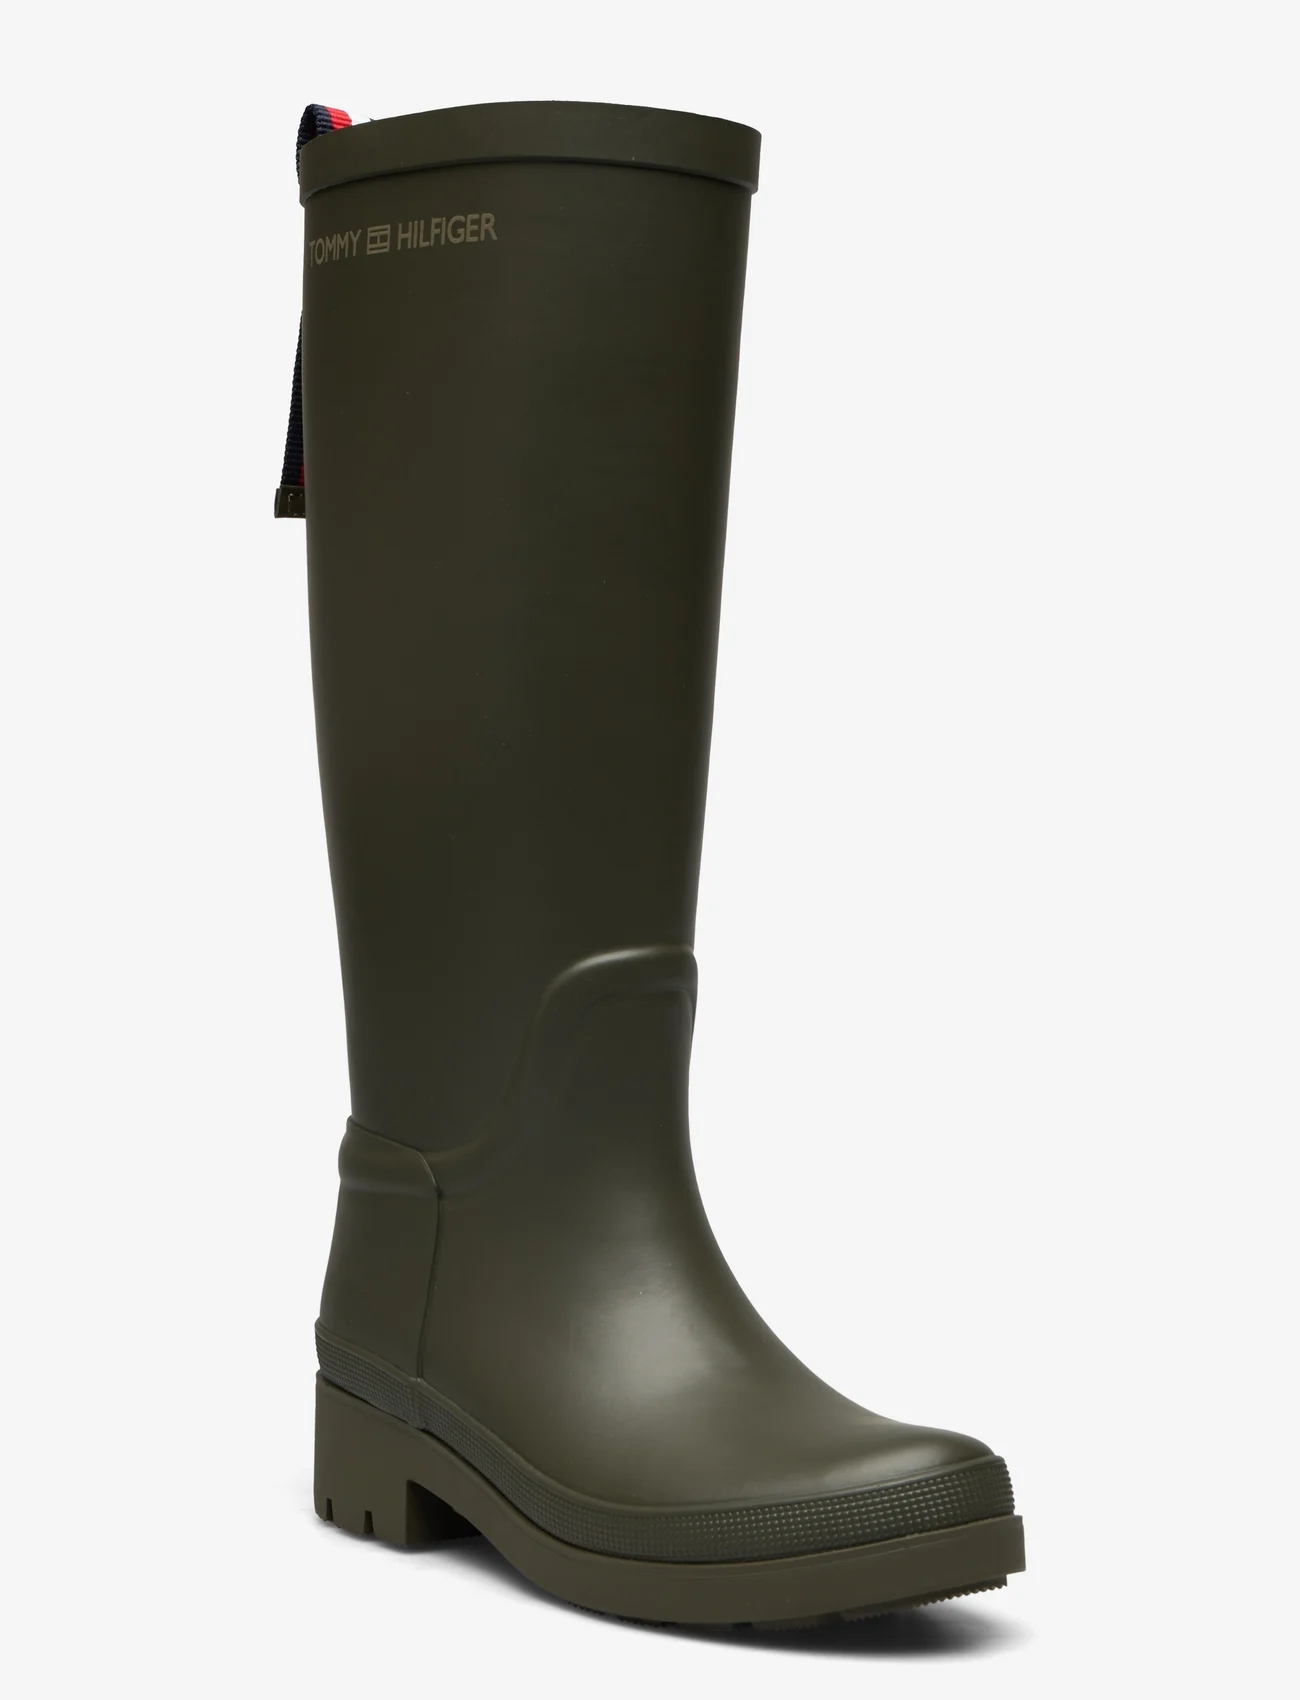 Tommy Hilfiger - TOMMY RUBBERBOOT - women - army green - 0